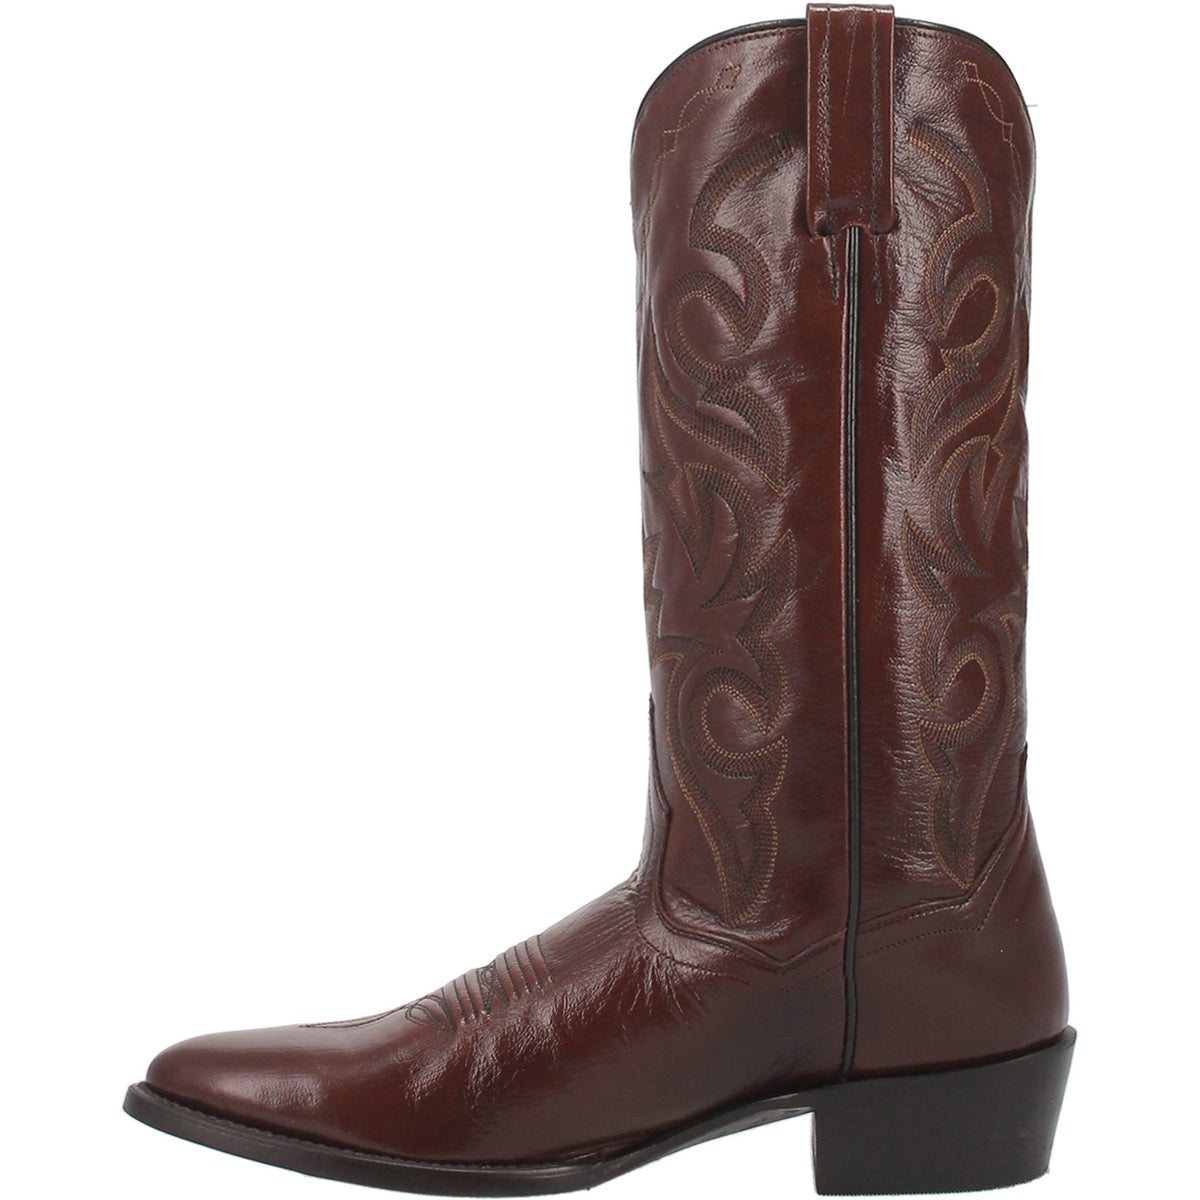 MILWAUKEE LEATHER BOOT Cover